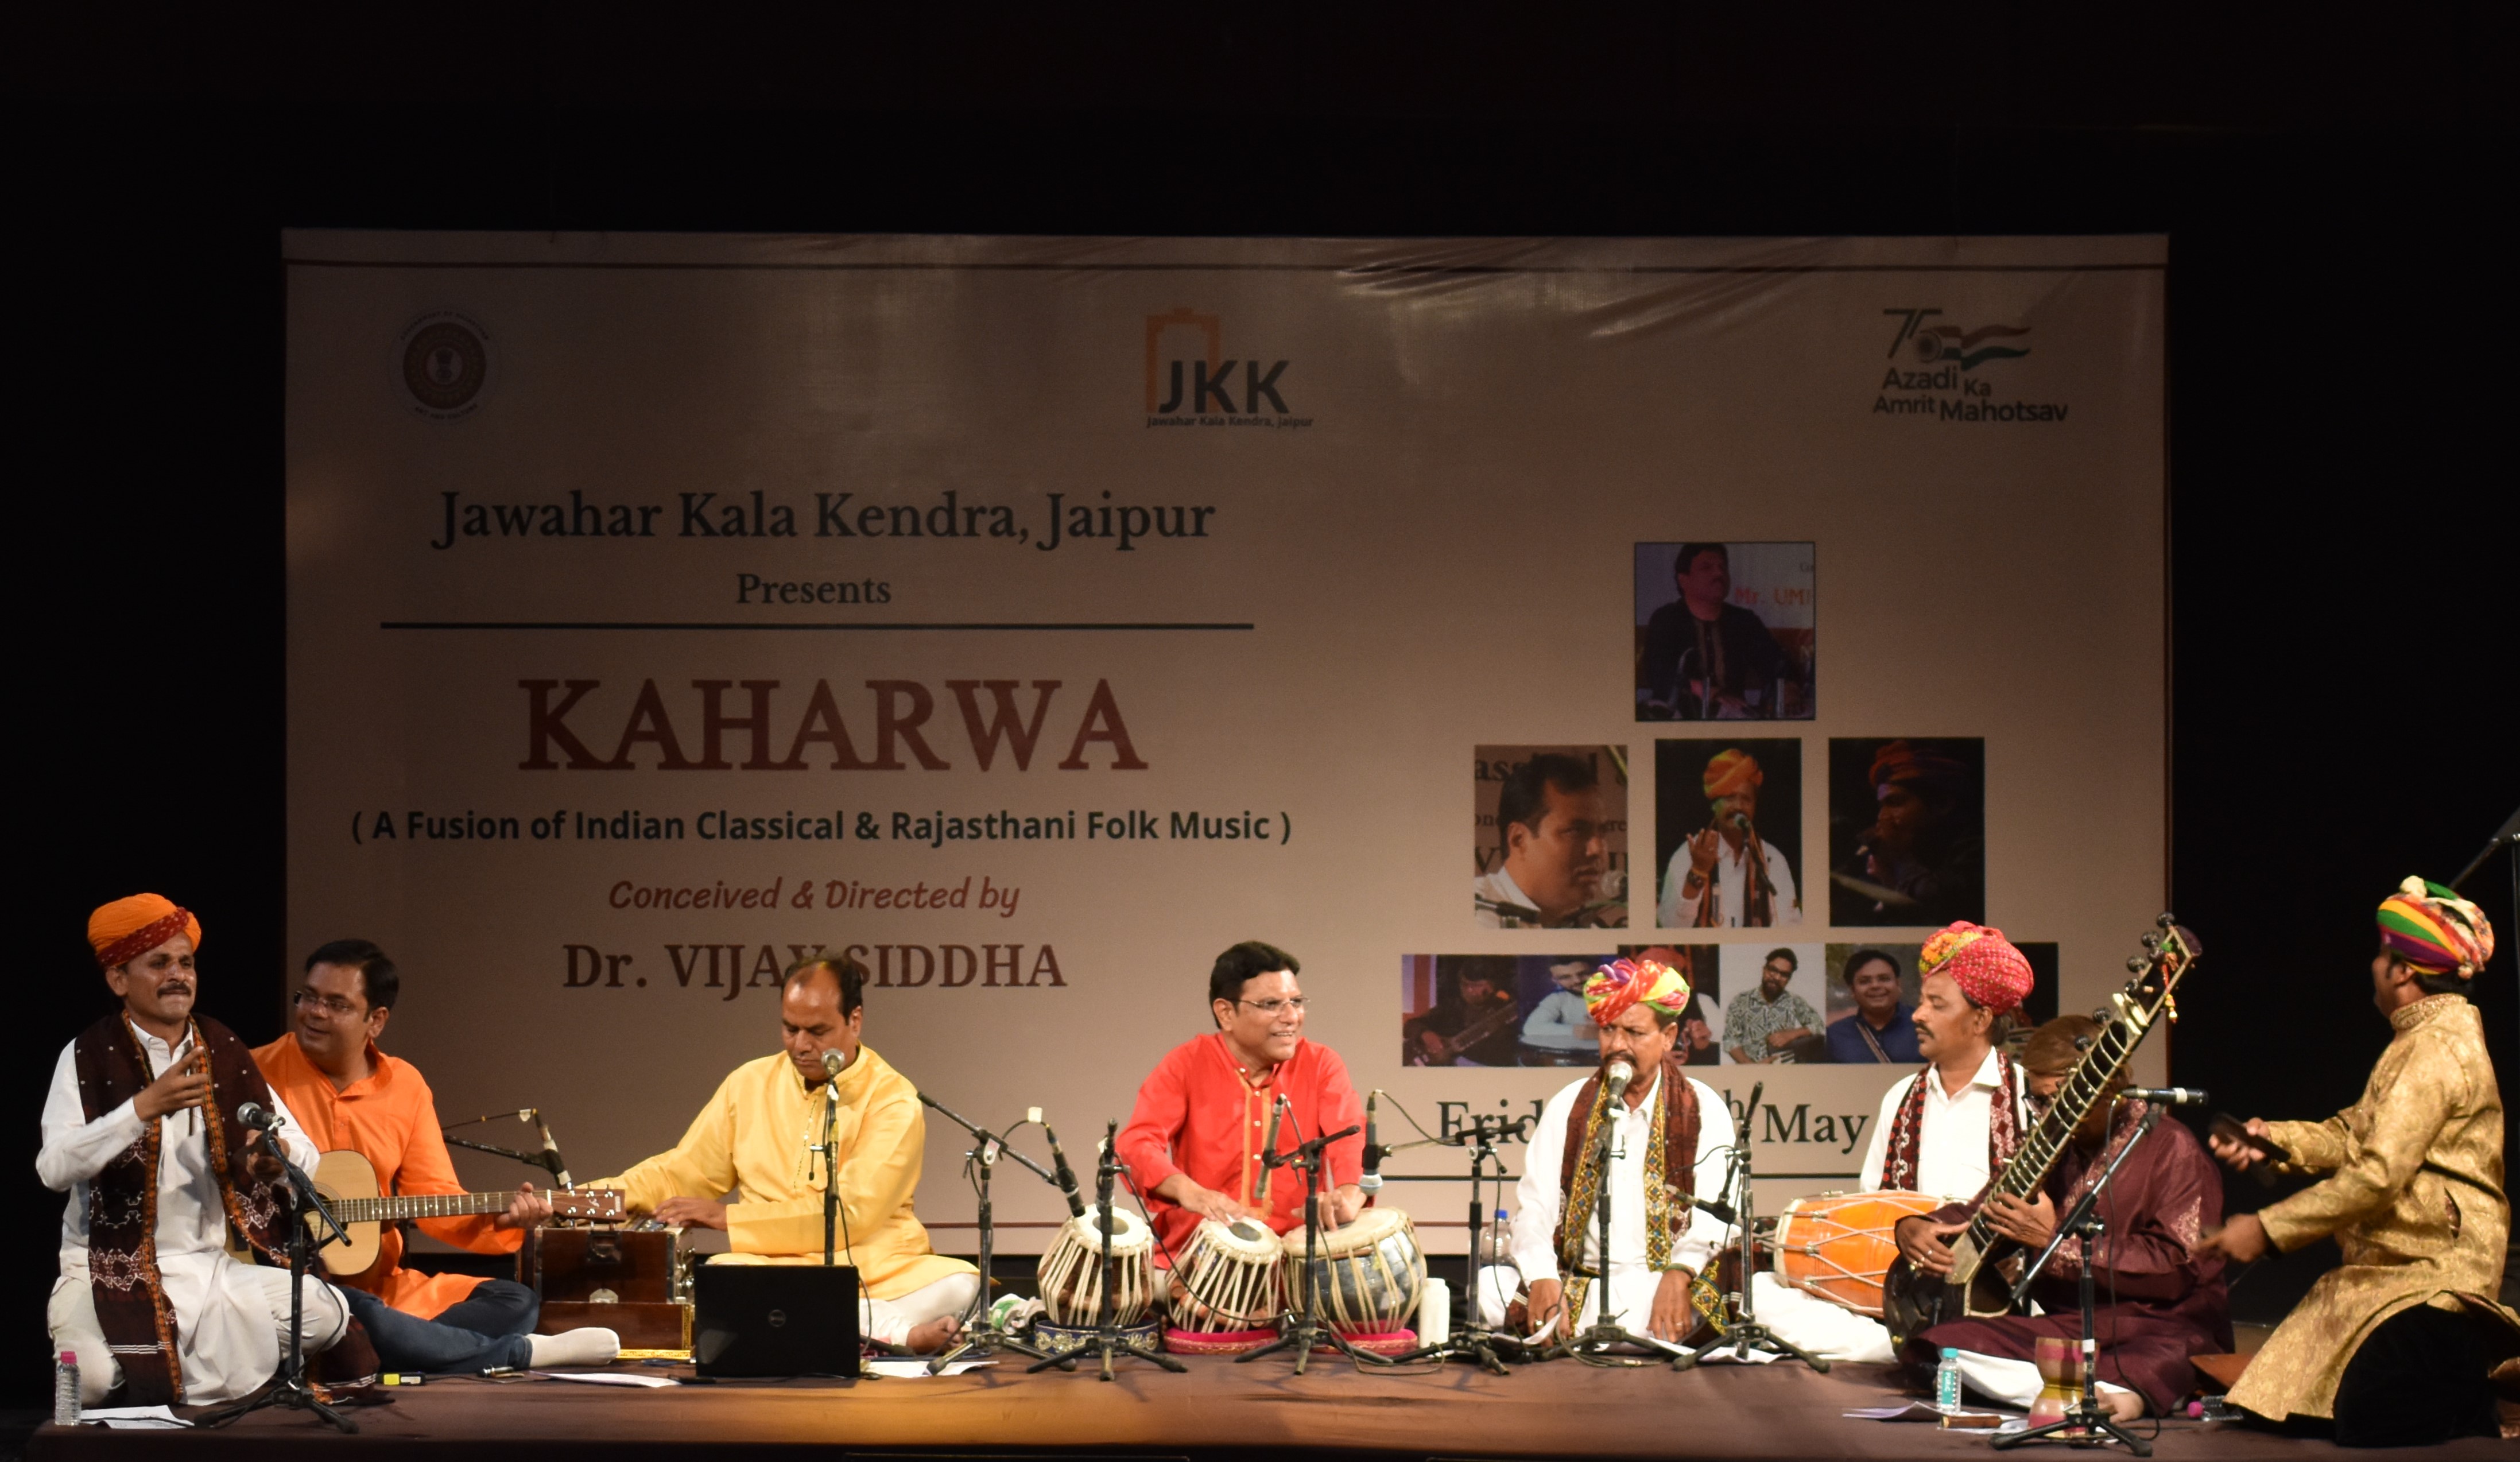 VIEWERS ENJOY A MAGICAL ‘KAHARWA’ EVENING WITH FUSION MUSICAL PERFORMANCE AT JKK